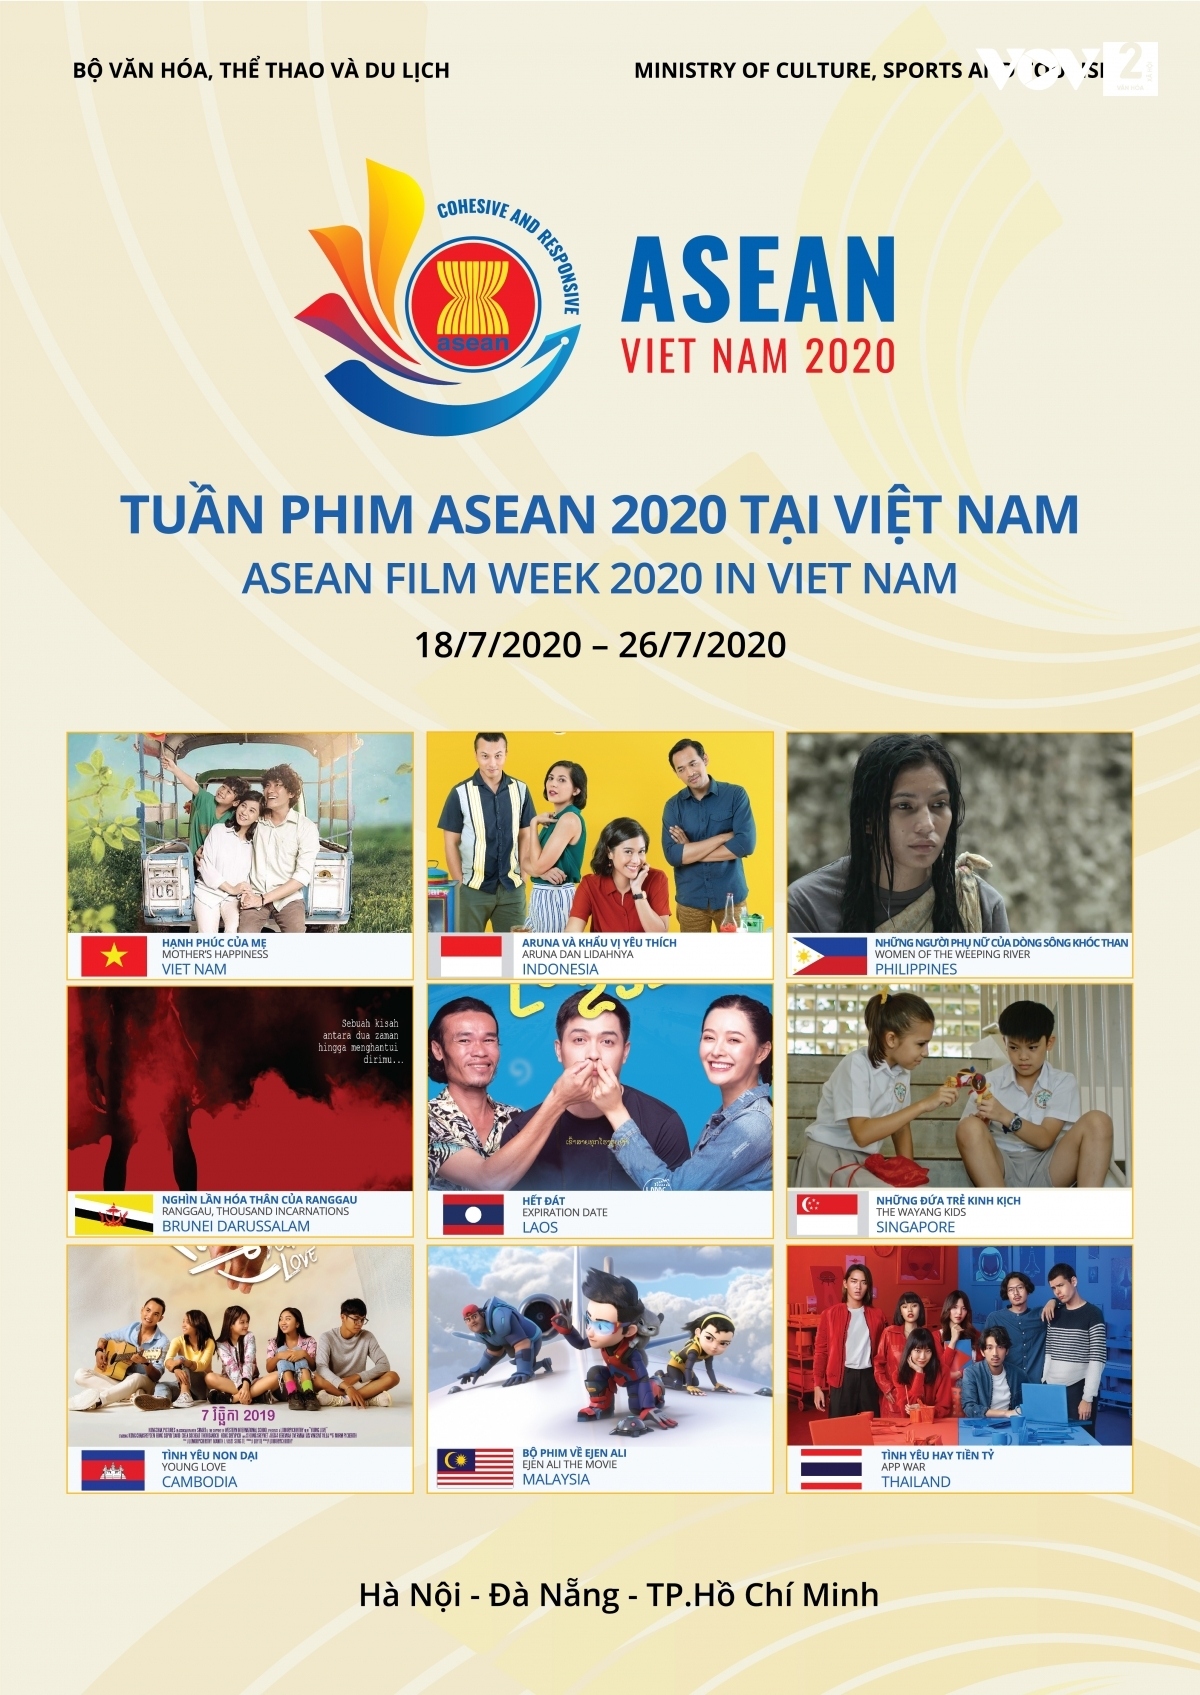 cultural imprints during vietnamese year as asean chair picture 2